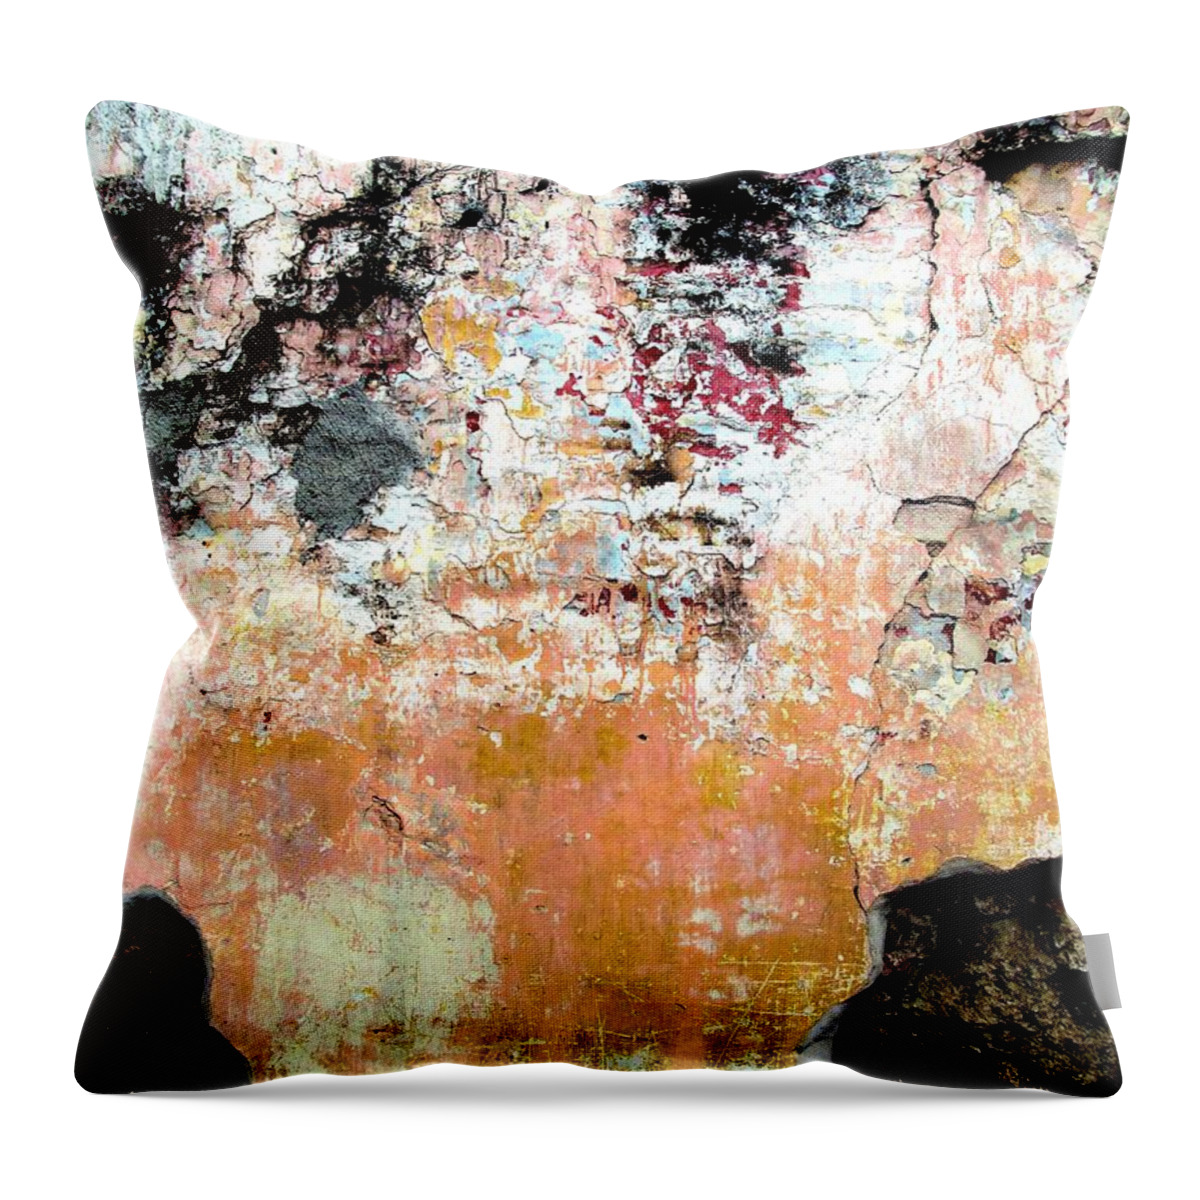 Texture Throw Pillow featuring the digital art Wall Abstract 87 by Maria Huntley